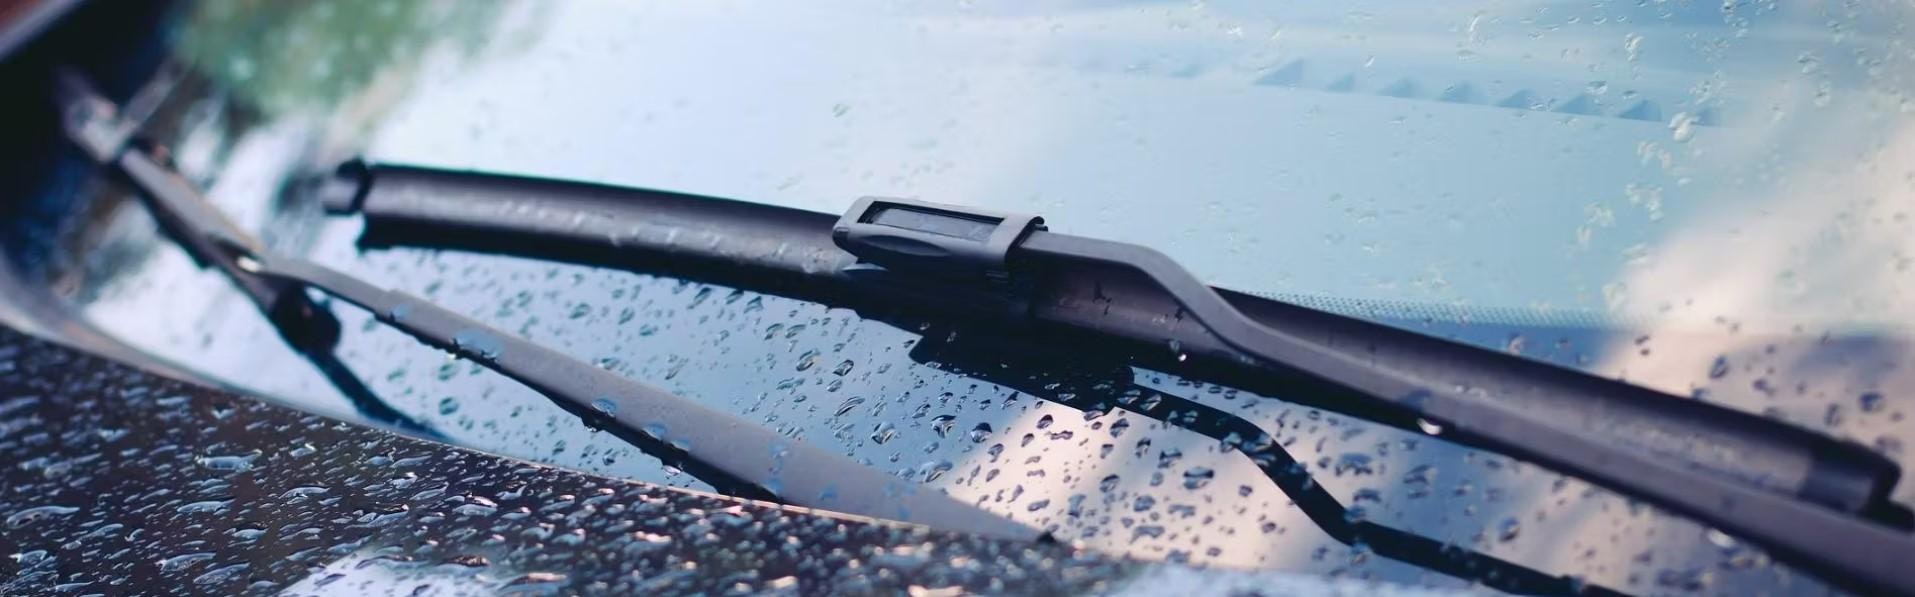 Answers to FAQs About Windshield Wiper Bladers on Your Car